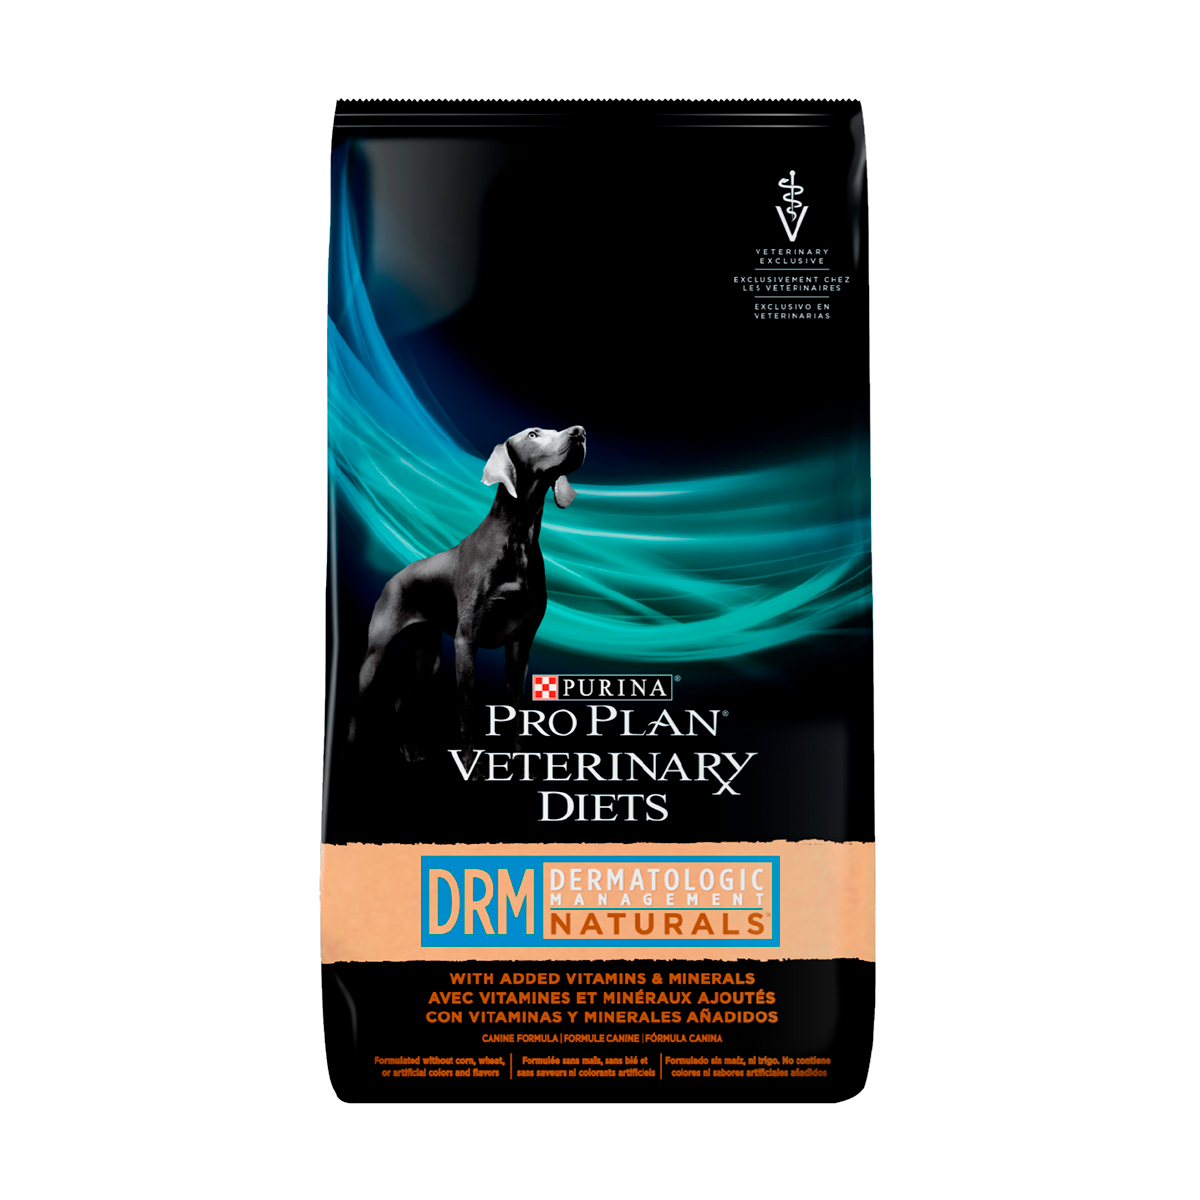 ProPlan-Veterinary-Diets-Dermatologic-MGMT-Naturals-Front.png